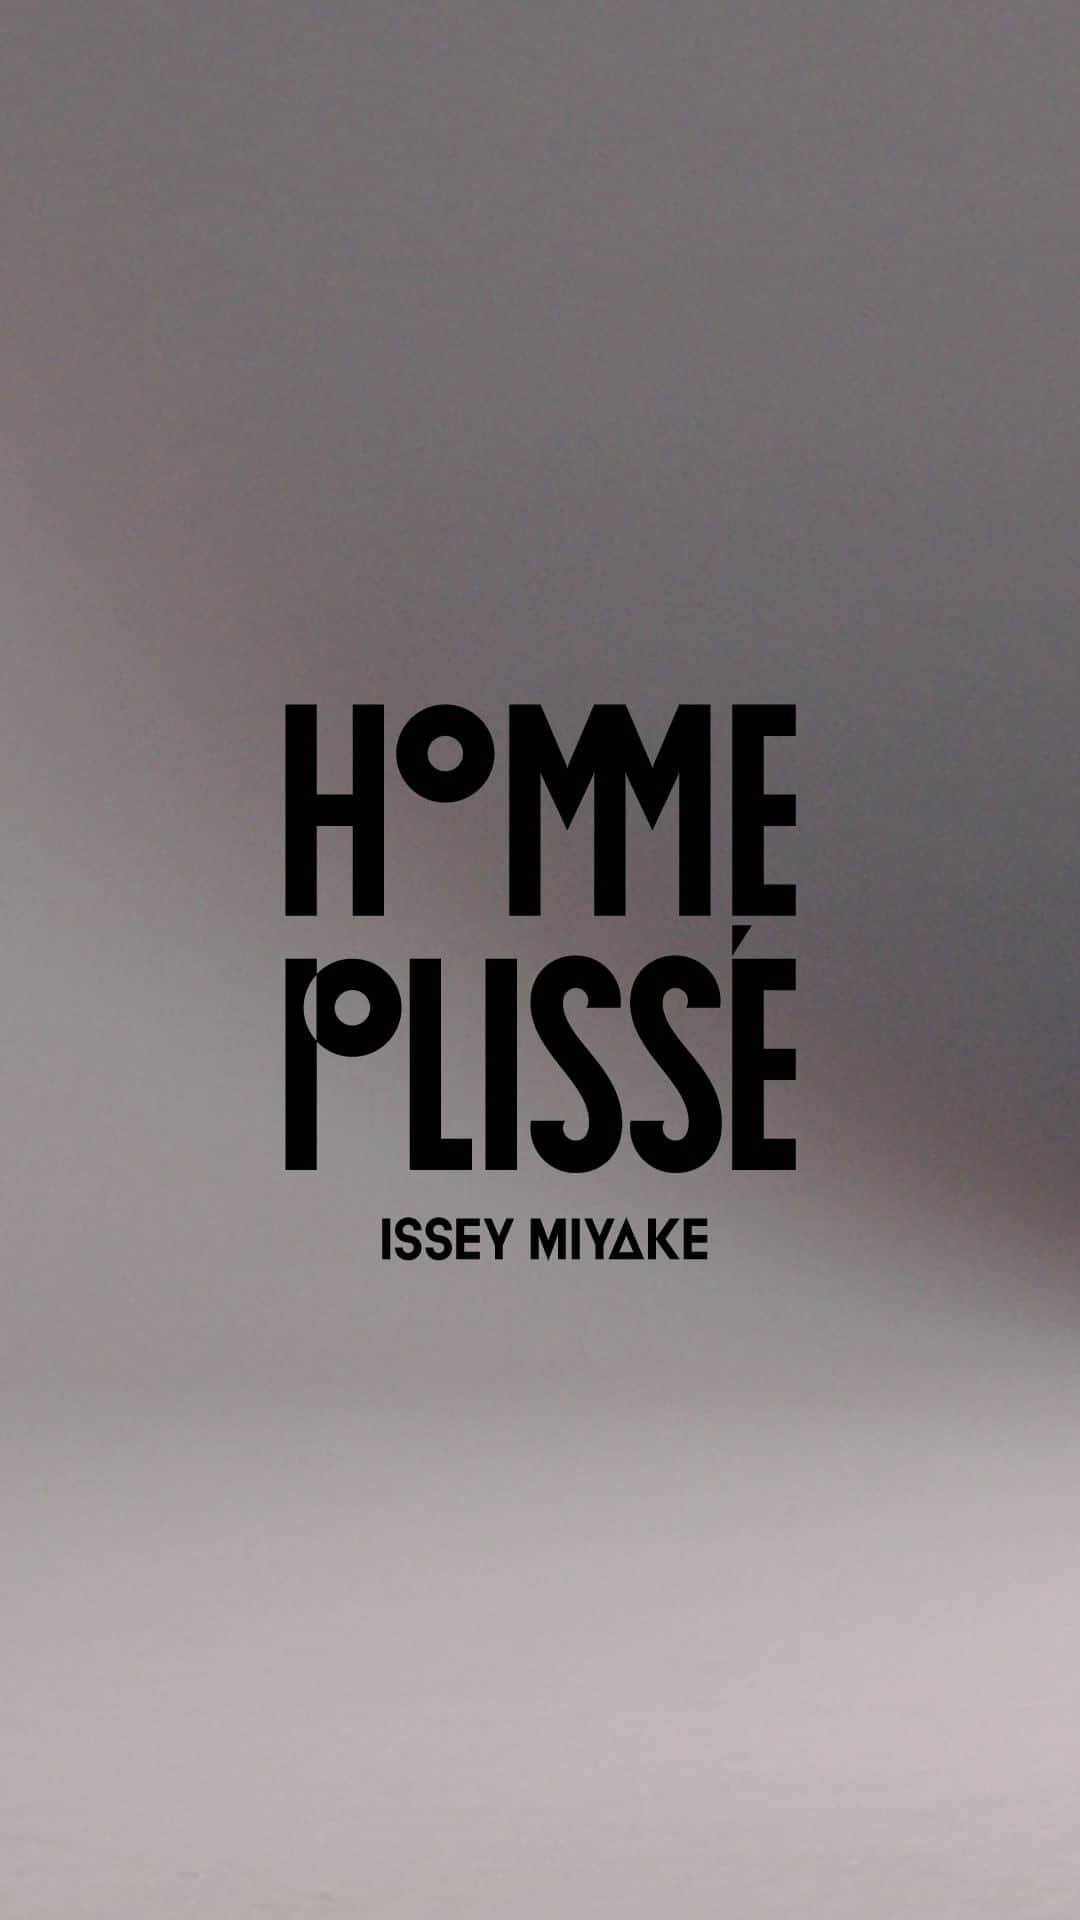 HOMME PLISSÉ ISSEY MIYAKE Official Instagram accountのインスタグラム：「HOMME PLISSÉ ISSEY MIYAKE premiered its SPRING SUMMER 2022 collection Human Ensemble on Thursday, June 24. The collection looks at the human body as it is constructed, and integrates elements inspired by the bodyʼs form, movement, and complexion into the design. Based on the brandʼs concept of clothing made for everyday living, the collection engages with the strength and beauty of the human body to explore original ensembles in harmony with their wearer.  HOMME PLISSÉ ISSEY MIYAKEは6月24日（木）、「Human Ensemble（ヒューマン・アンサンブル）」をテーマに、2022年春夏コレクションをオンライン形式で発表しました。「人間のからだ」を一つの構造物として、その力強さと美しさに着想を得た今回のコレクションは、身体のフォルム、動き、表情などの視点から服づくりに取り組みました。従来の「多様で普遍的な日常着」というコンセプトを基に、「身体」に向き合い、衣服と着る人の間に生まれる調和、すなわち「アンサンブル（組み合わせ）」を見出します。」